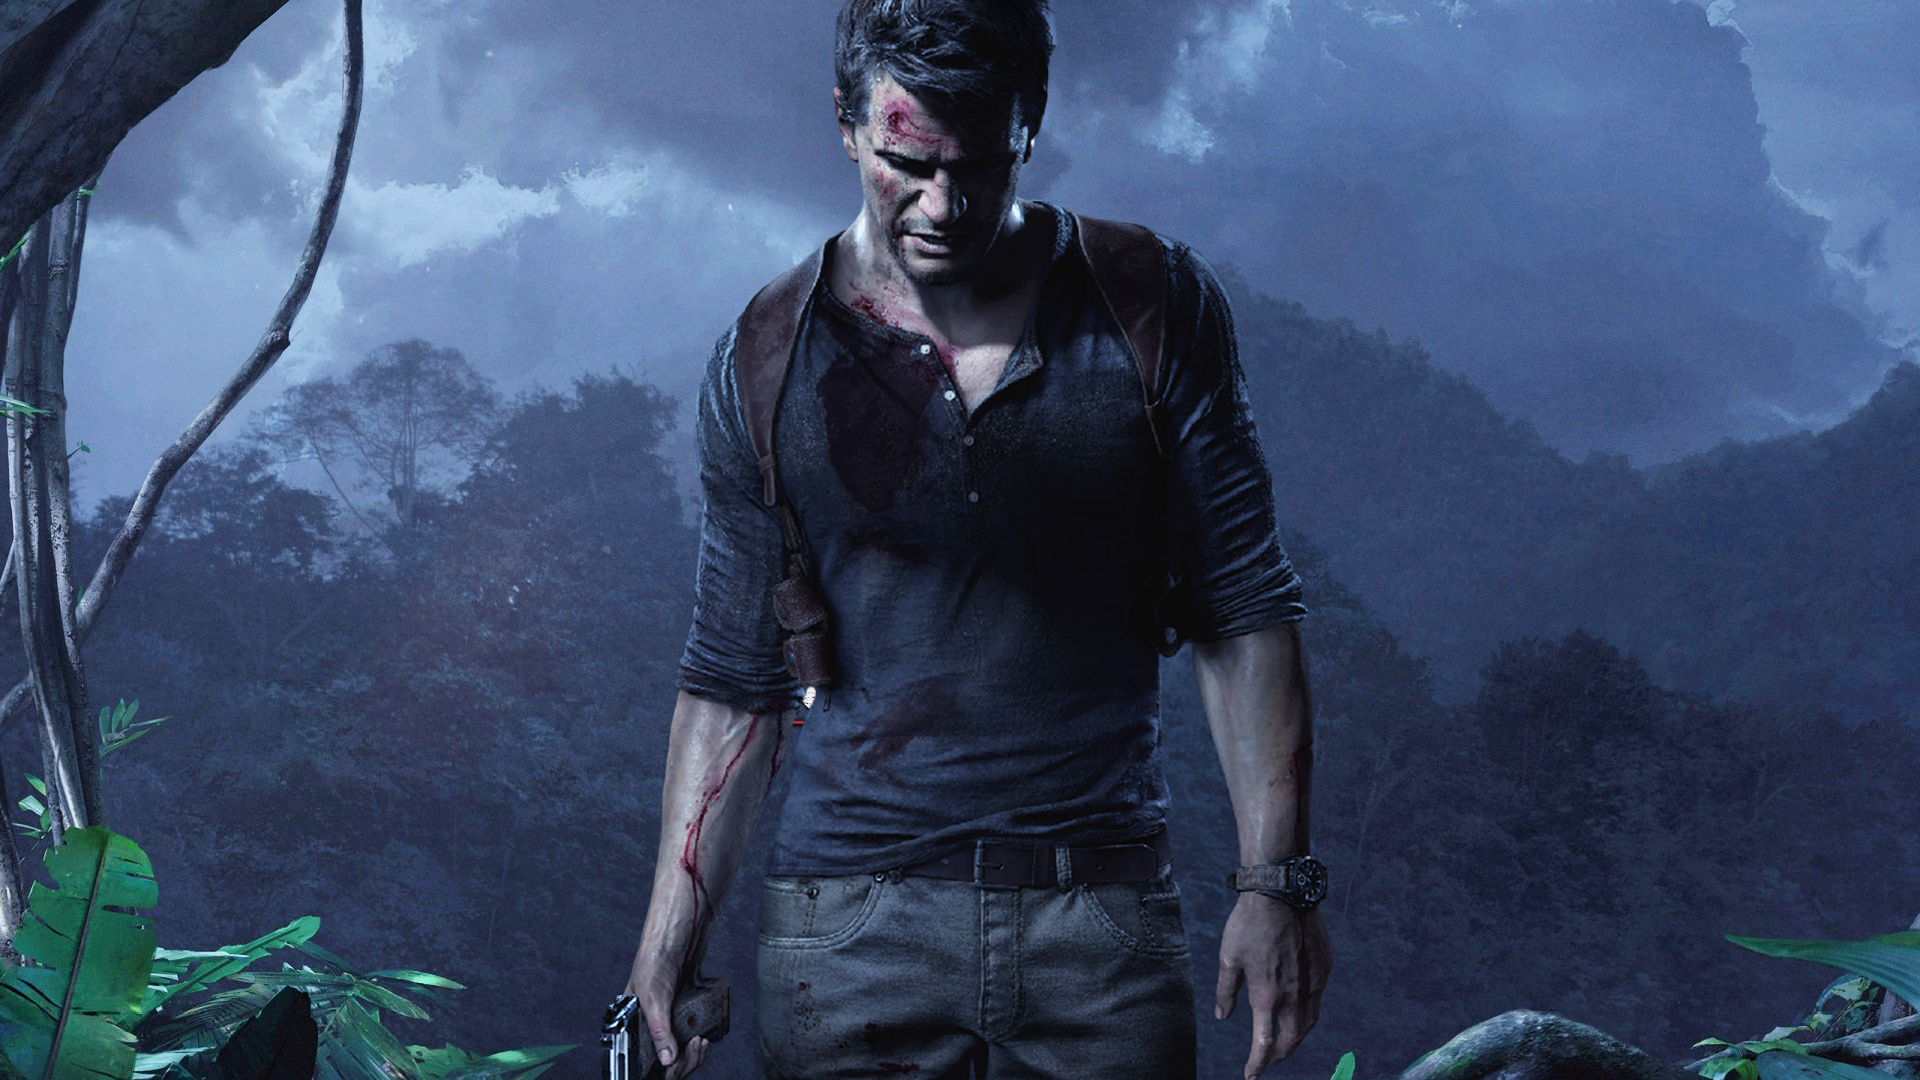 General 1920x1080 Uncharted 4: A Thief's End video games video game art men jungle blood Nathan Drake PlayStation 4 Playstation 4 Pro video game characters video game men